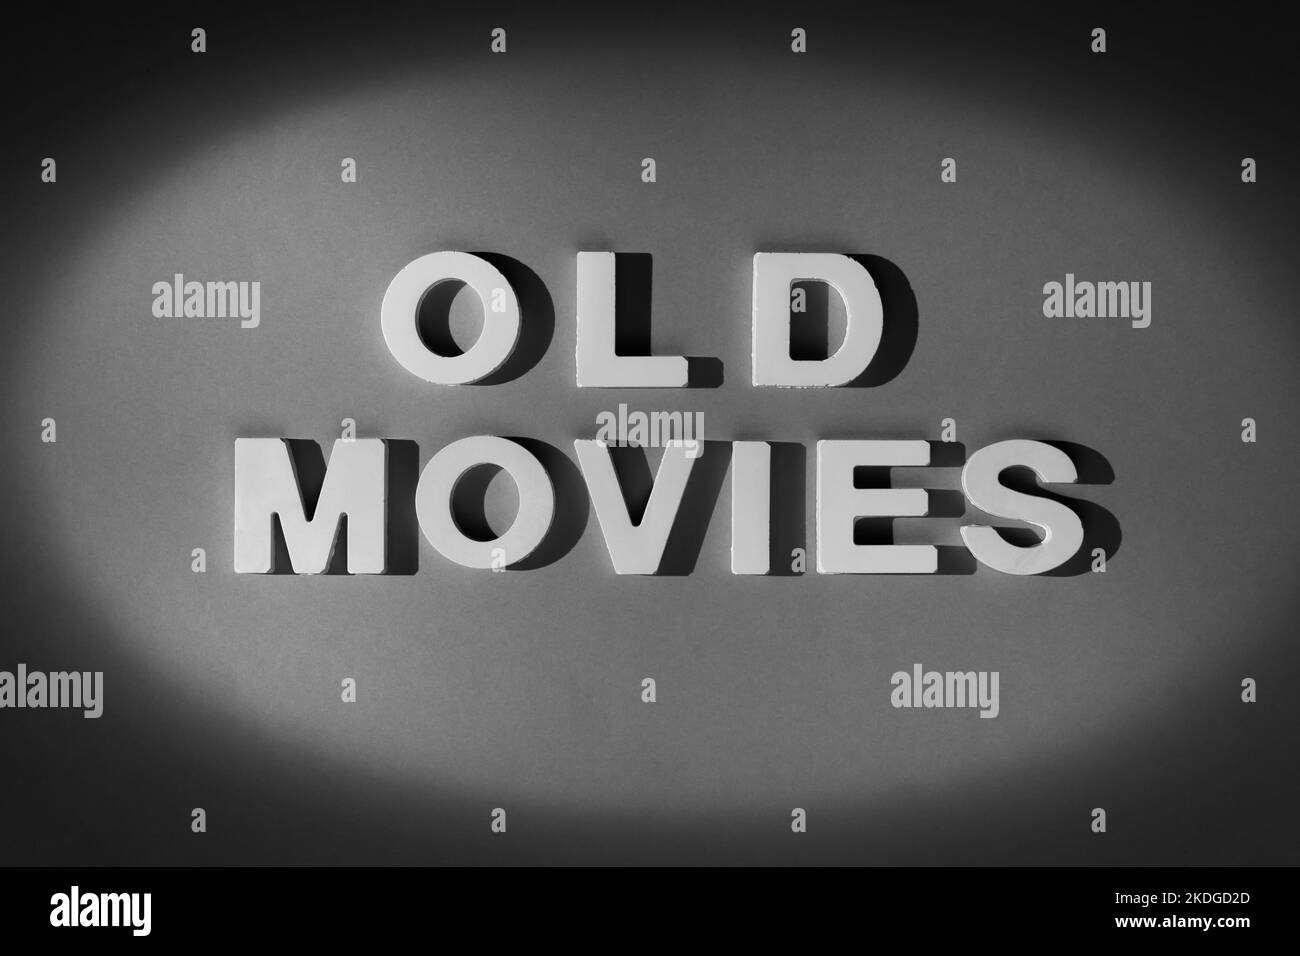 Old Movies - Vintage title style inscription. Black and white photograph Stock Photo